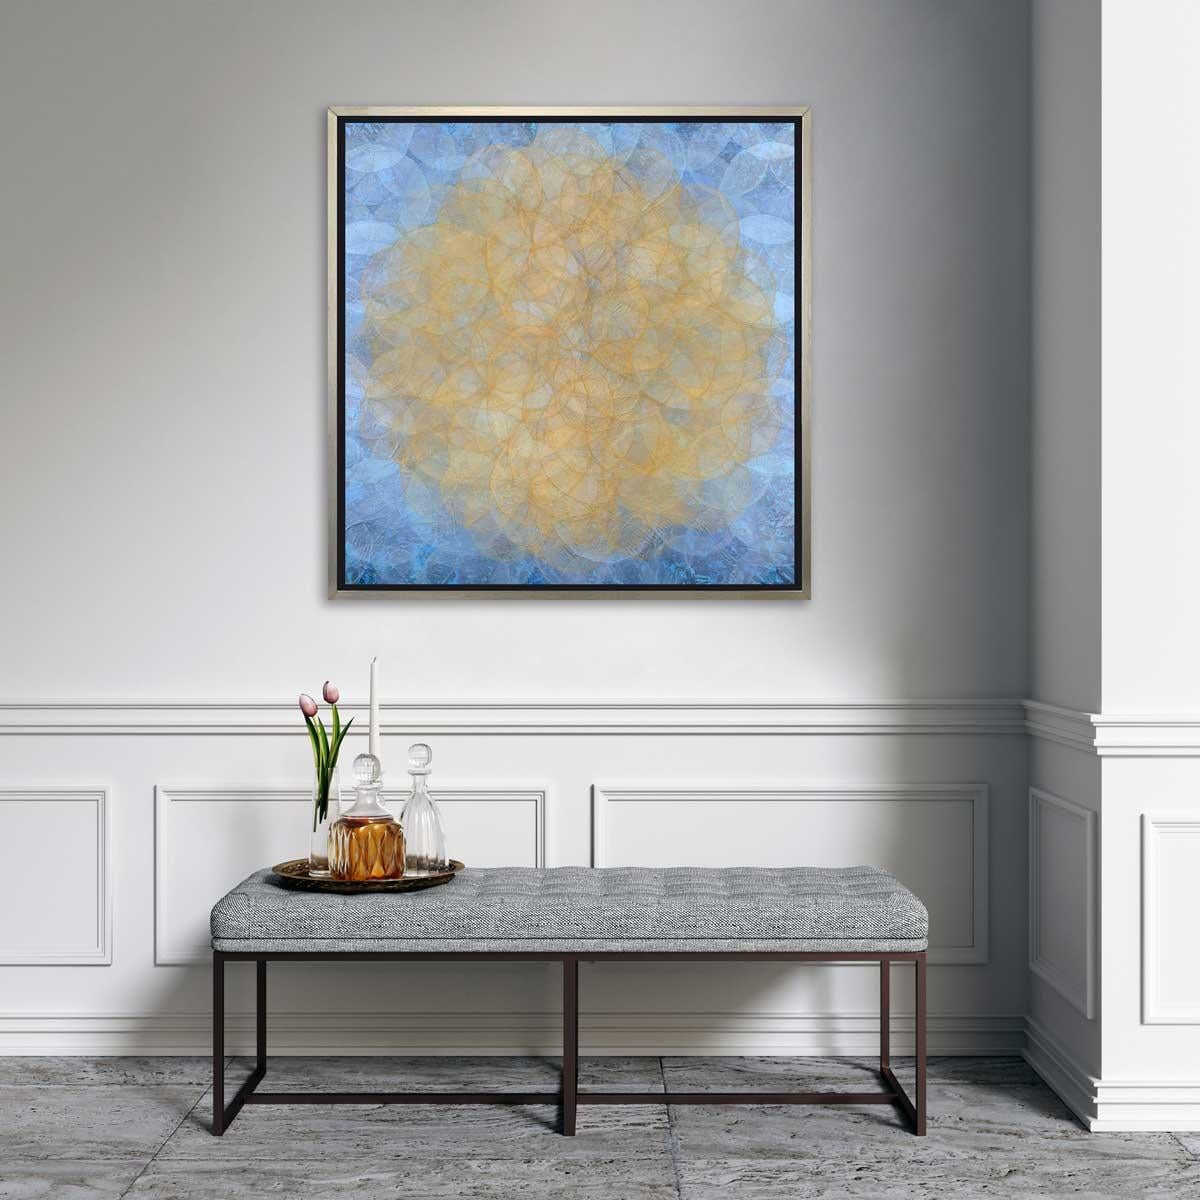 This abstract geometric limited edition print by Roger Mudre features lightly translucent concentric circles that overlap throughout the composition, creating a glowing effect of a yellow-gold circle at the center, surrounded by a light blue